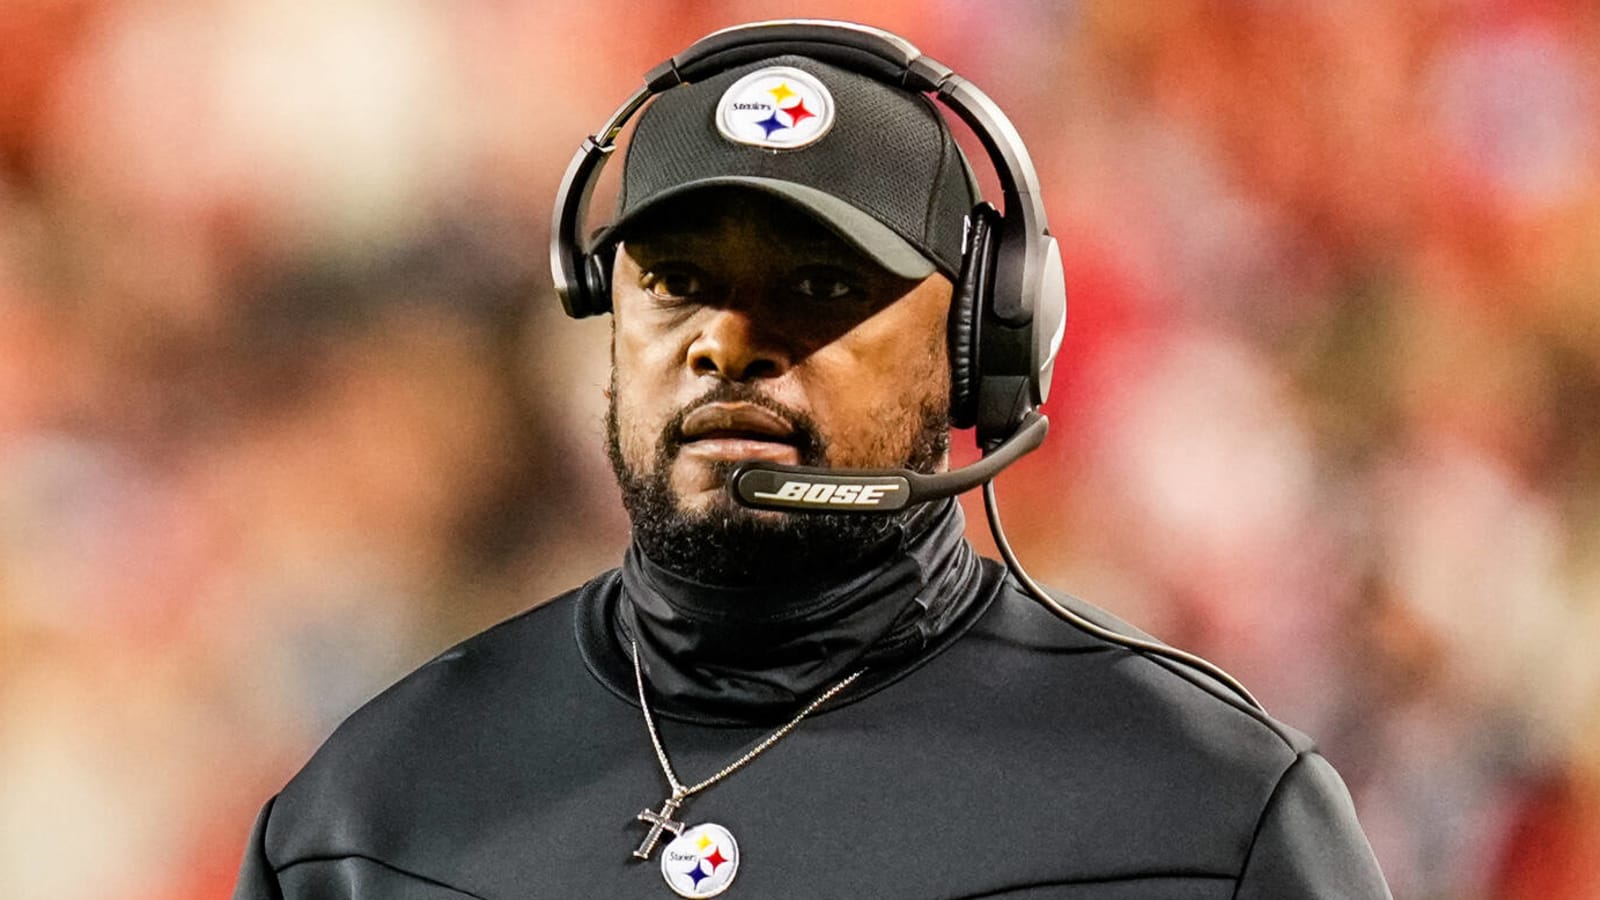 Mike Tomlin sounds less than enthusiastic about his OC